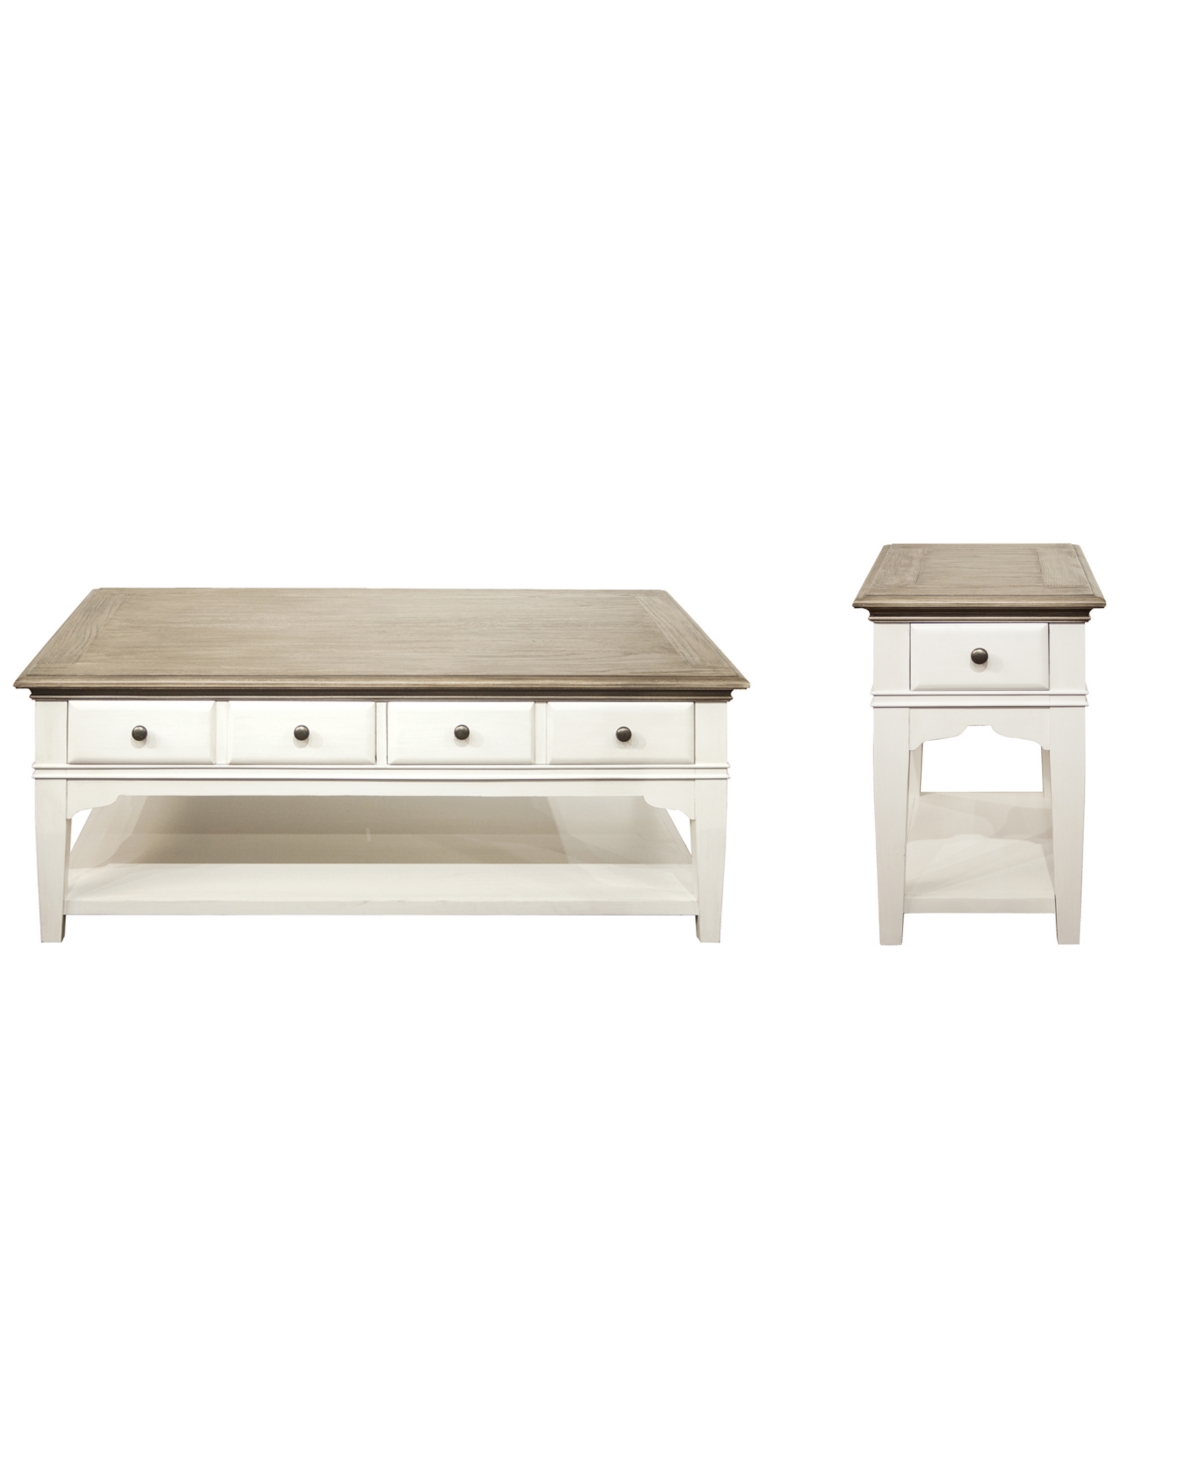 Macy's Myra Leg Cocktail Table And Chairside Table Set In Natural,paperwhite